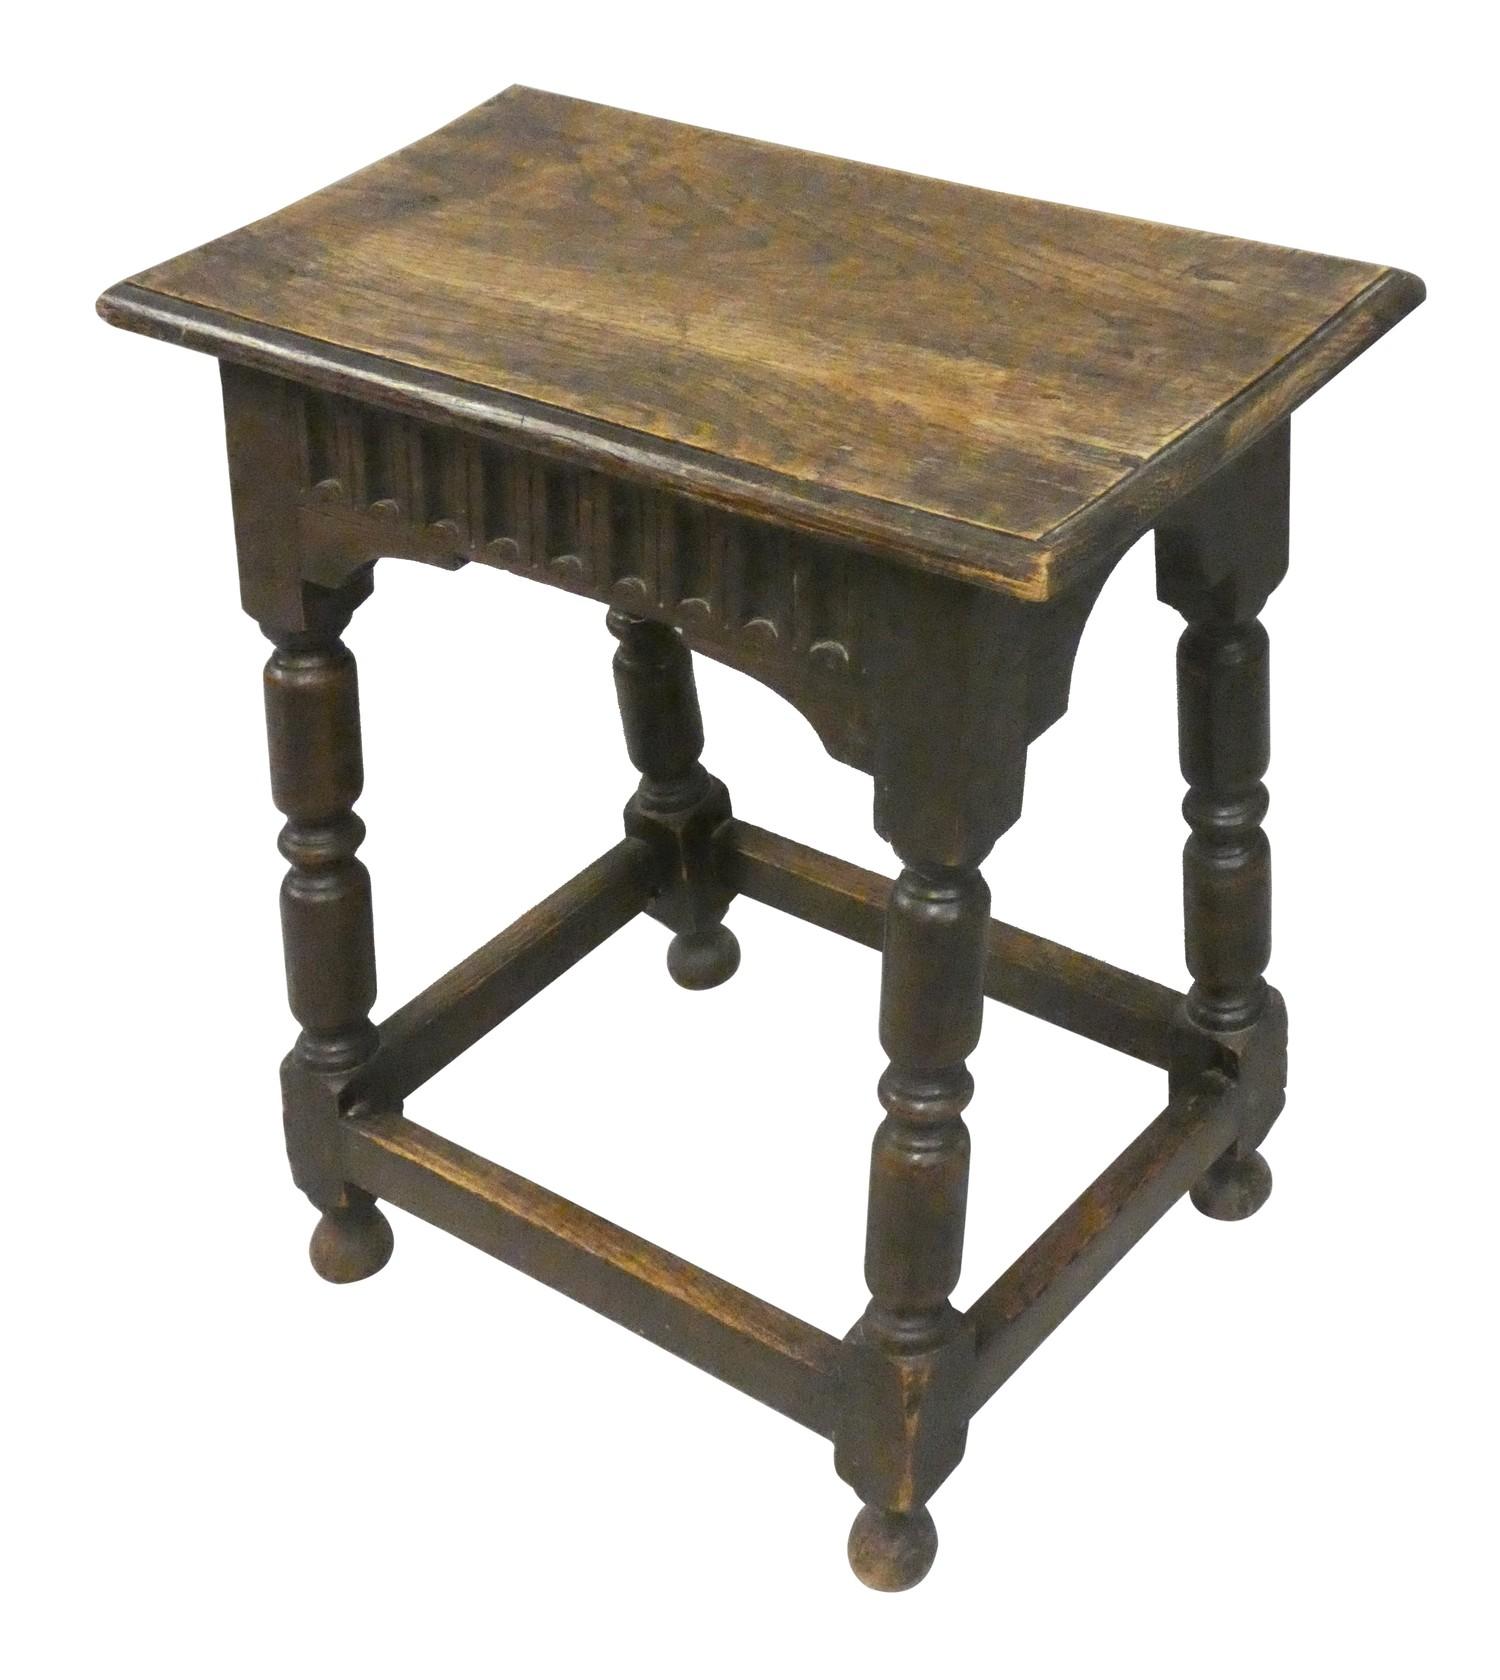 An Edwardian oak joint stool, with carved frieze and turned legs, 53 x 27 x 54 cm.